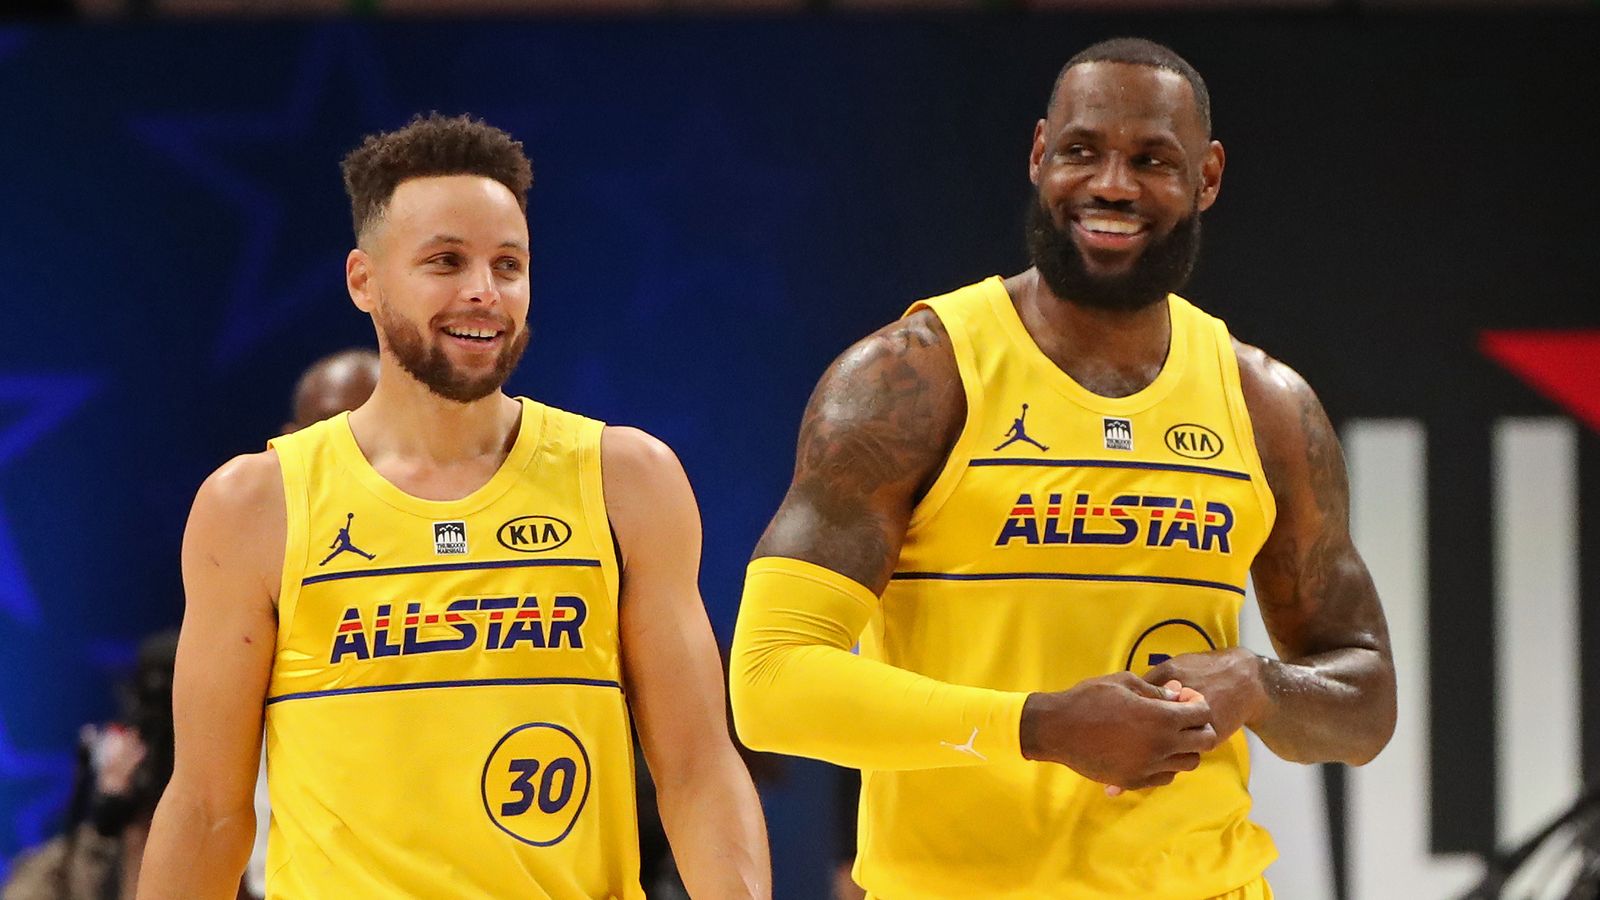 LeBron James stays undefeated in All-Star Game thanks to Steph Curry -  Silver Screen and Roll